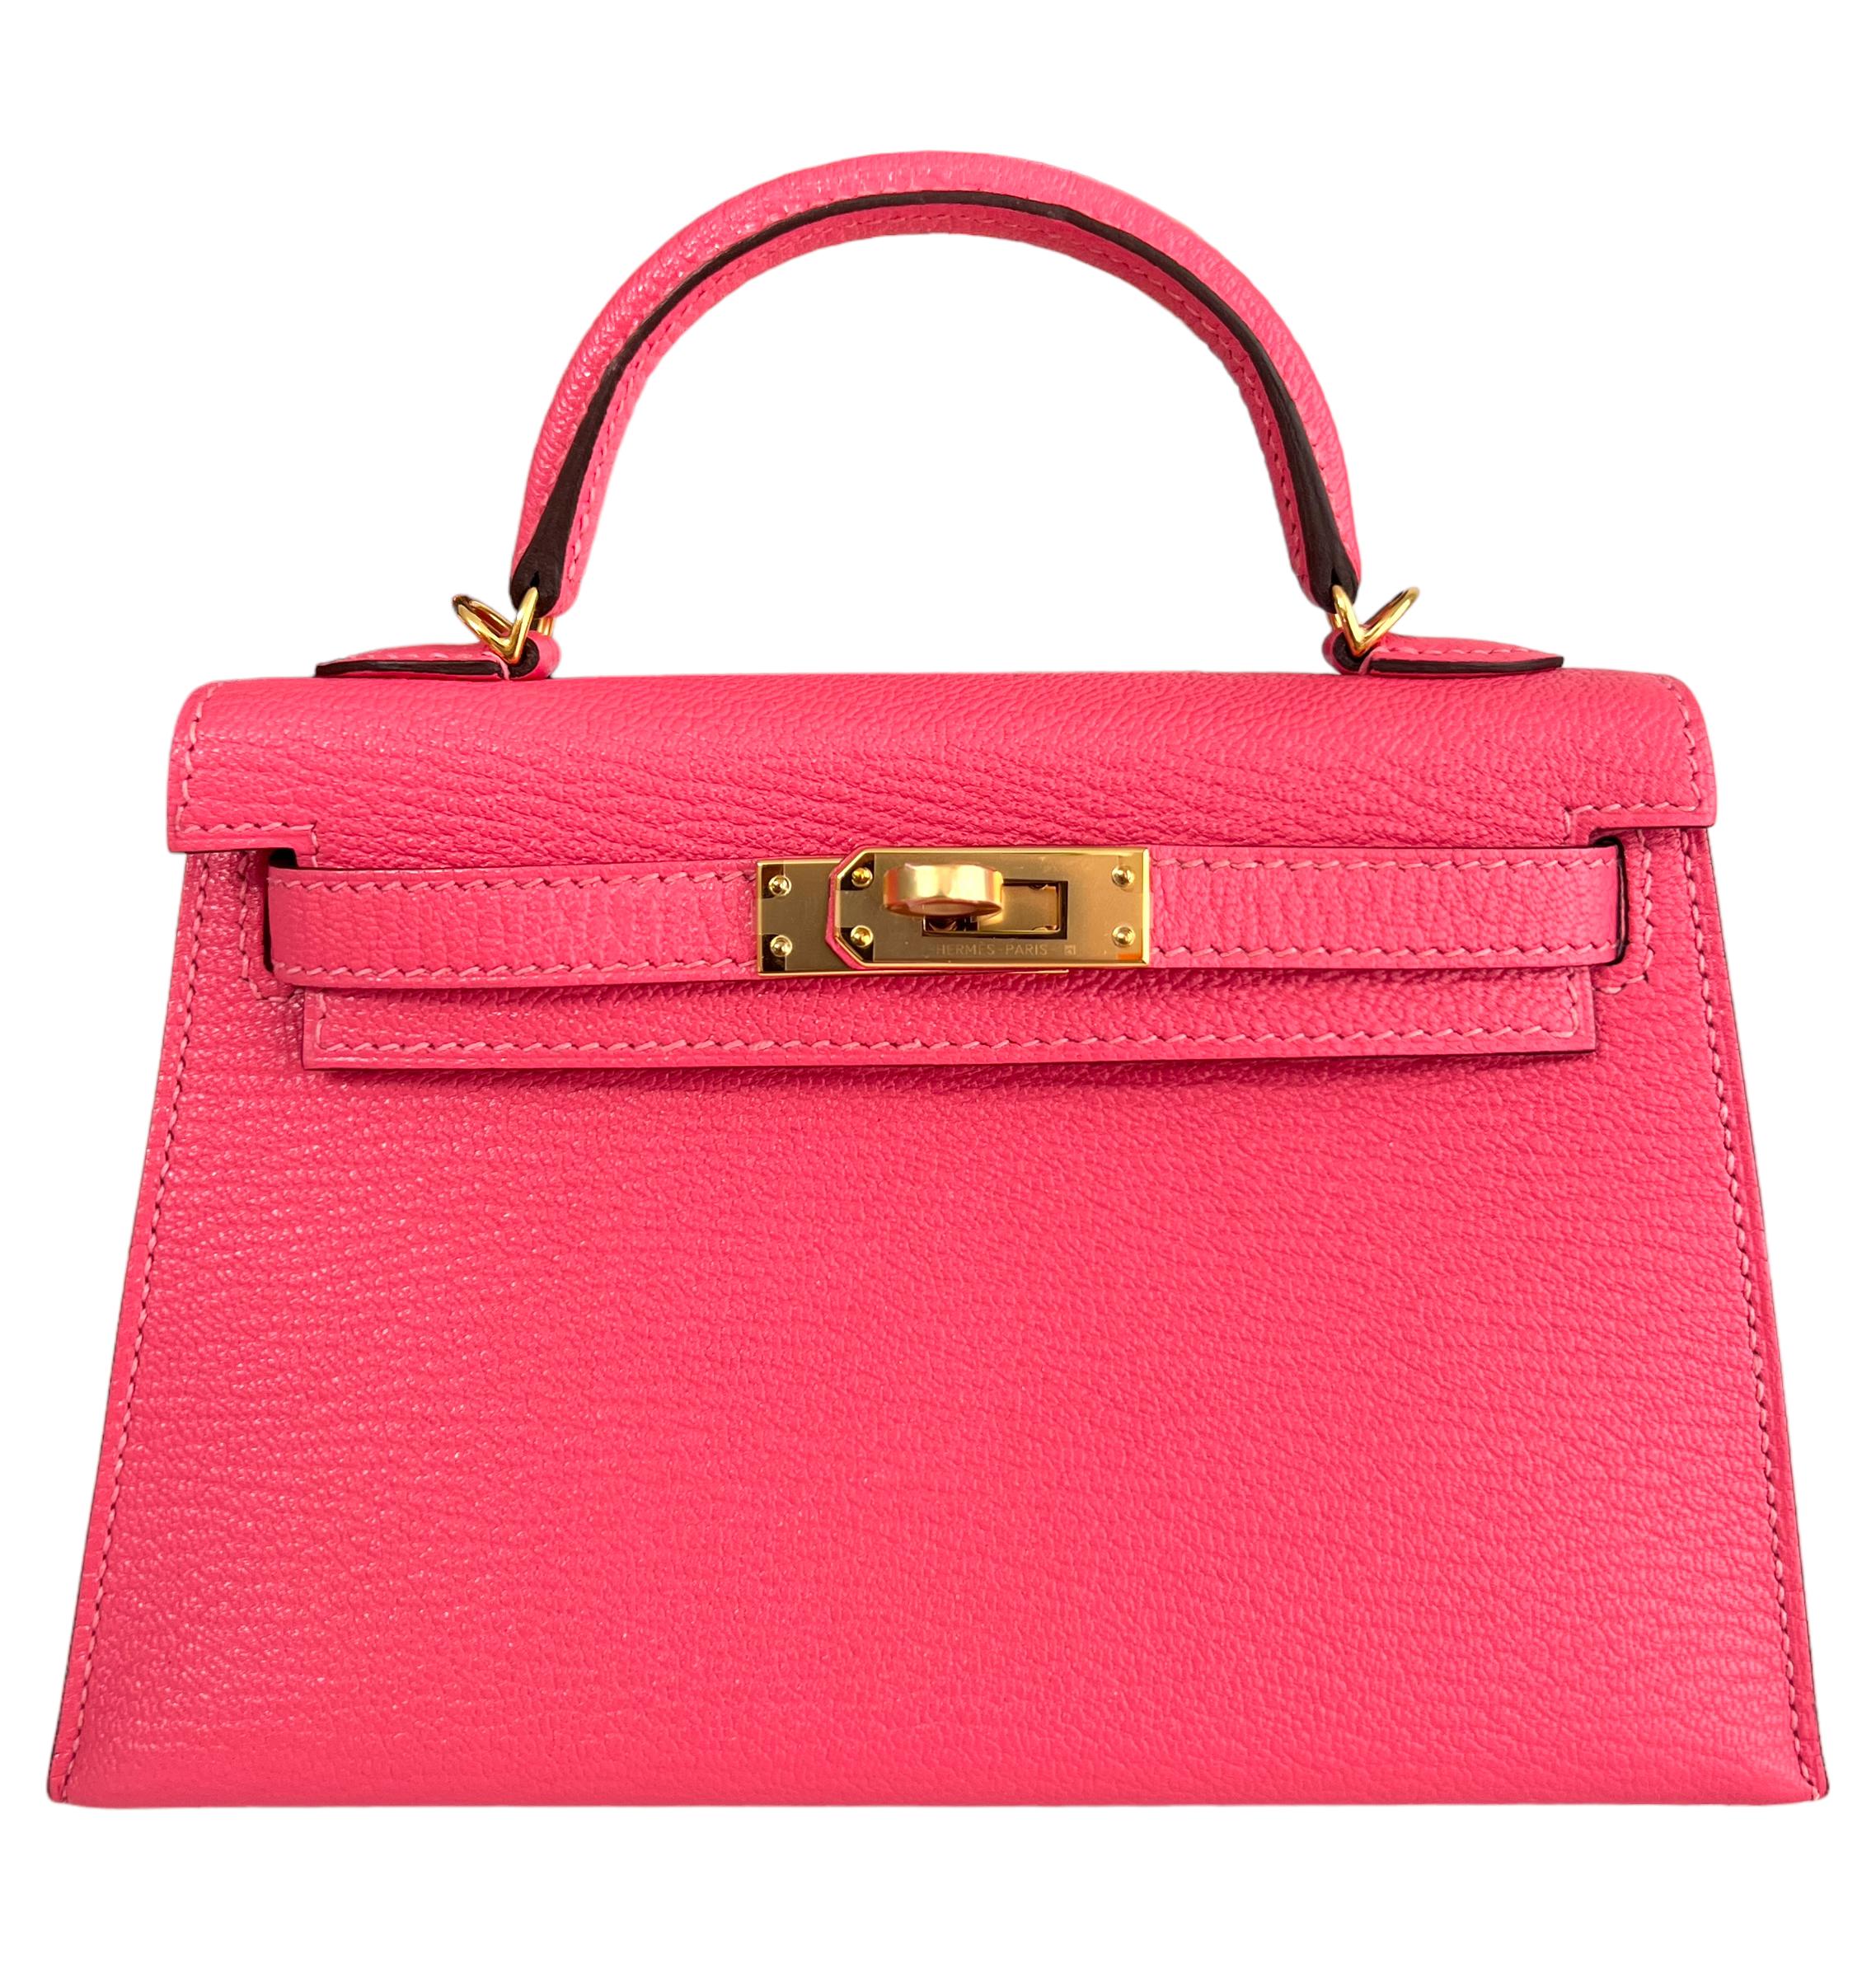 As New Ultra Rare and Hardest to get Hermes Mini Kelly 20 Rose Azalee Pink Chèvre Leather Complimented by Gold Hardware. Y Stamp 2020. 
Shop with Confidence from Lux Addicts. Authenticity Guaranteed! 

Lux Addicts is a Premier Luxury Dealer and one